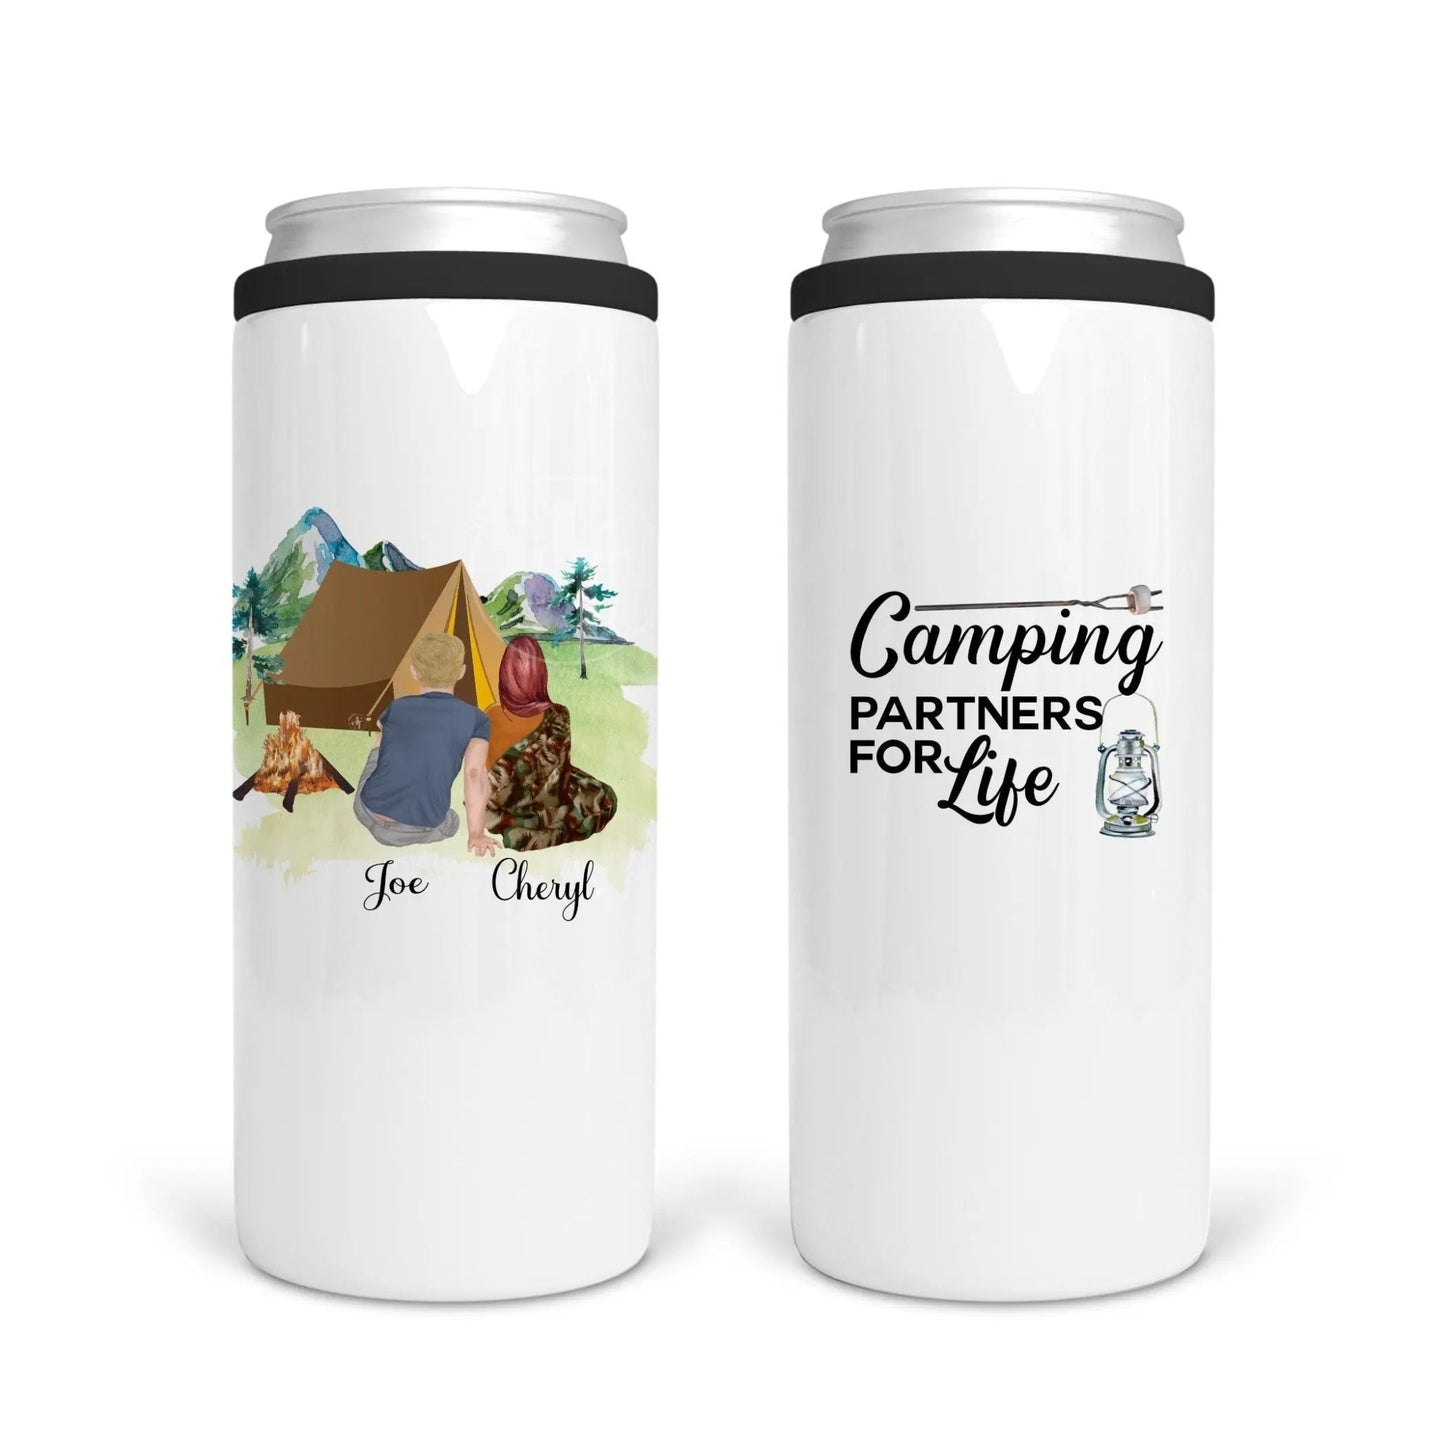 Camping partners for life - Jammin Threads